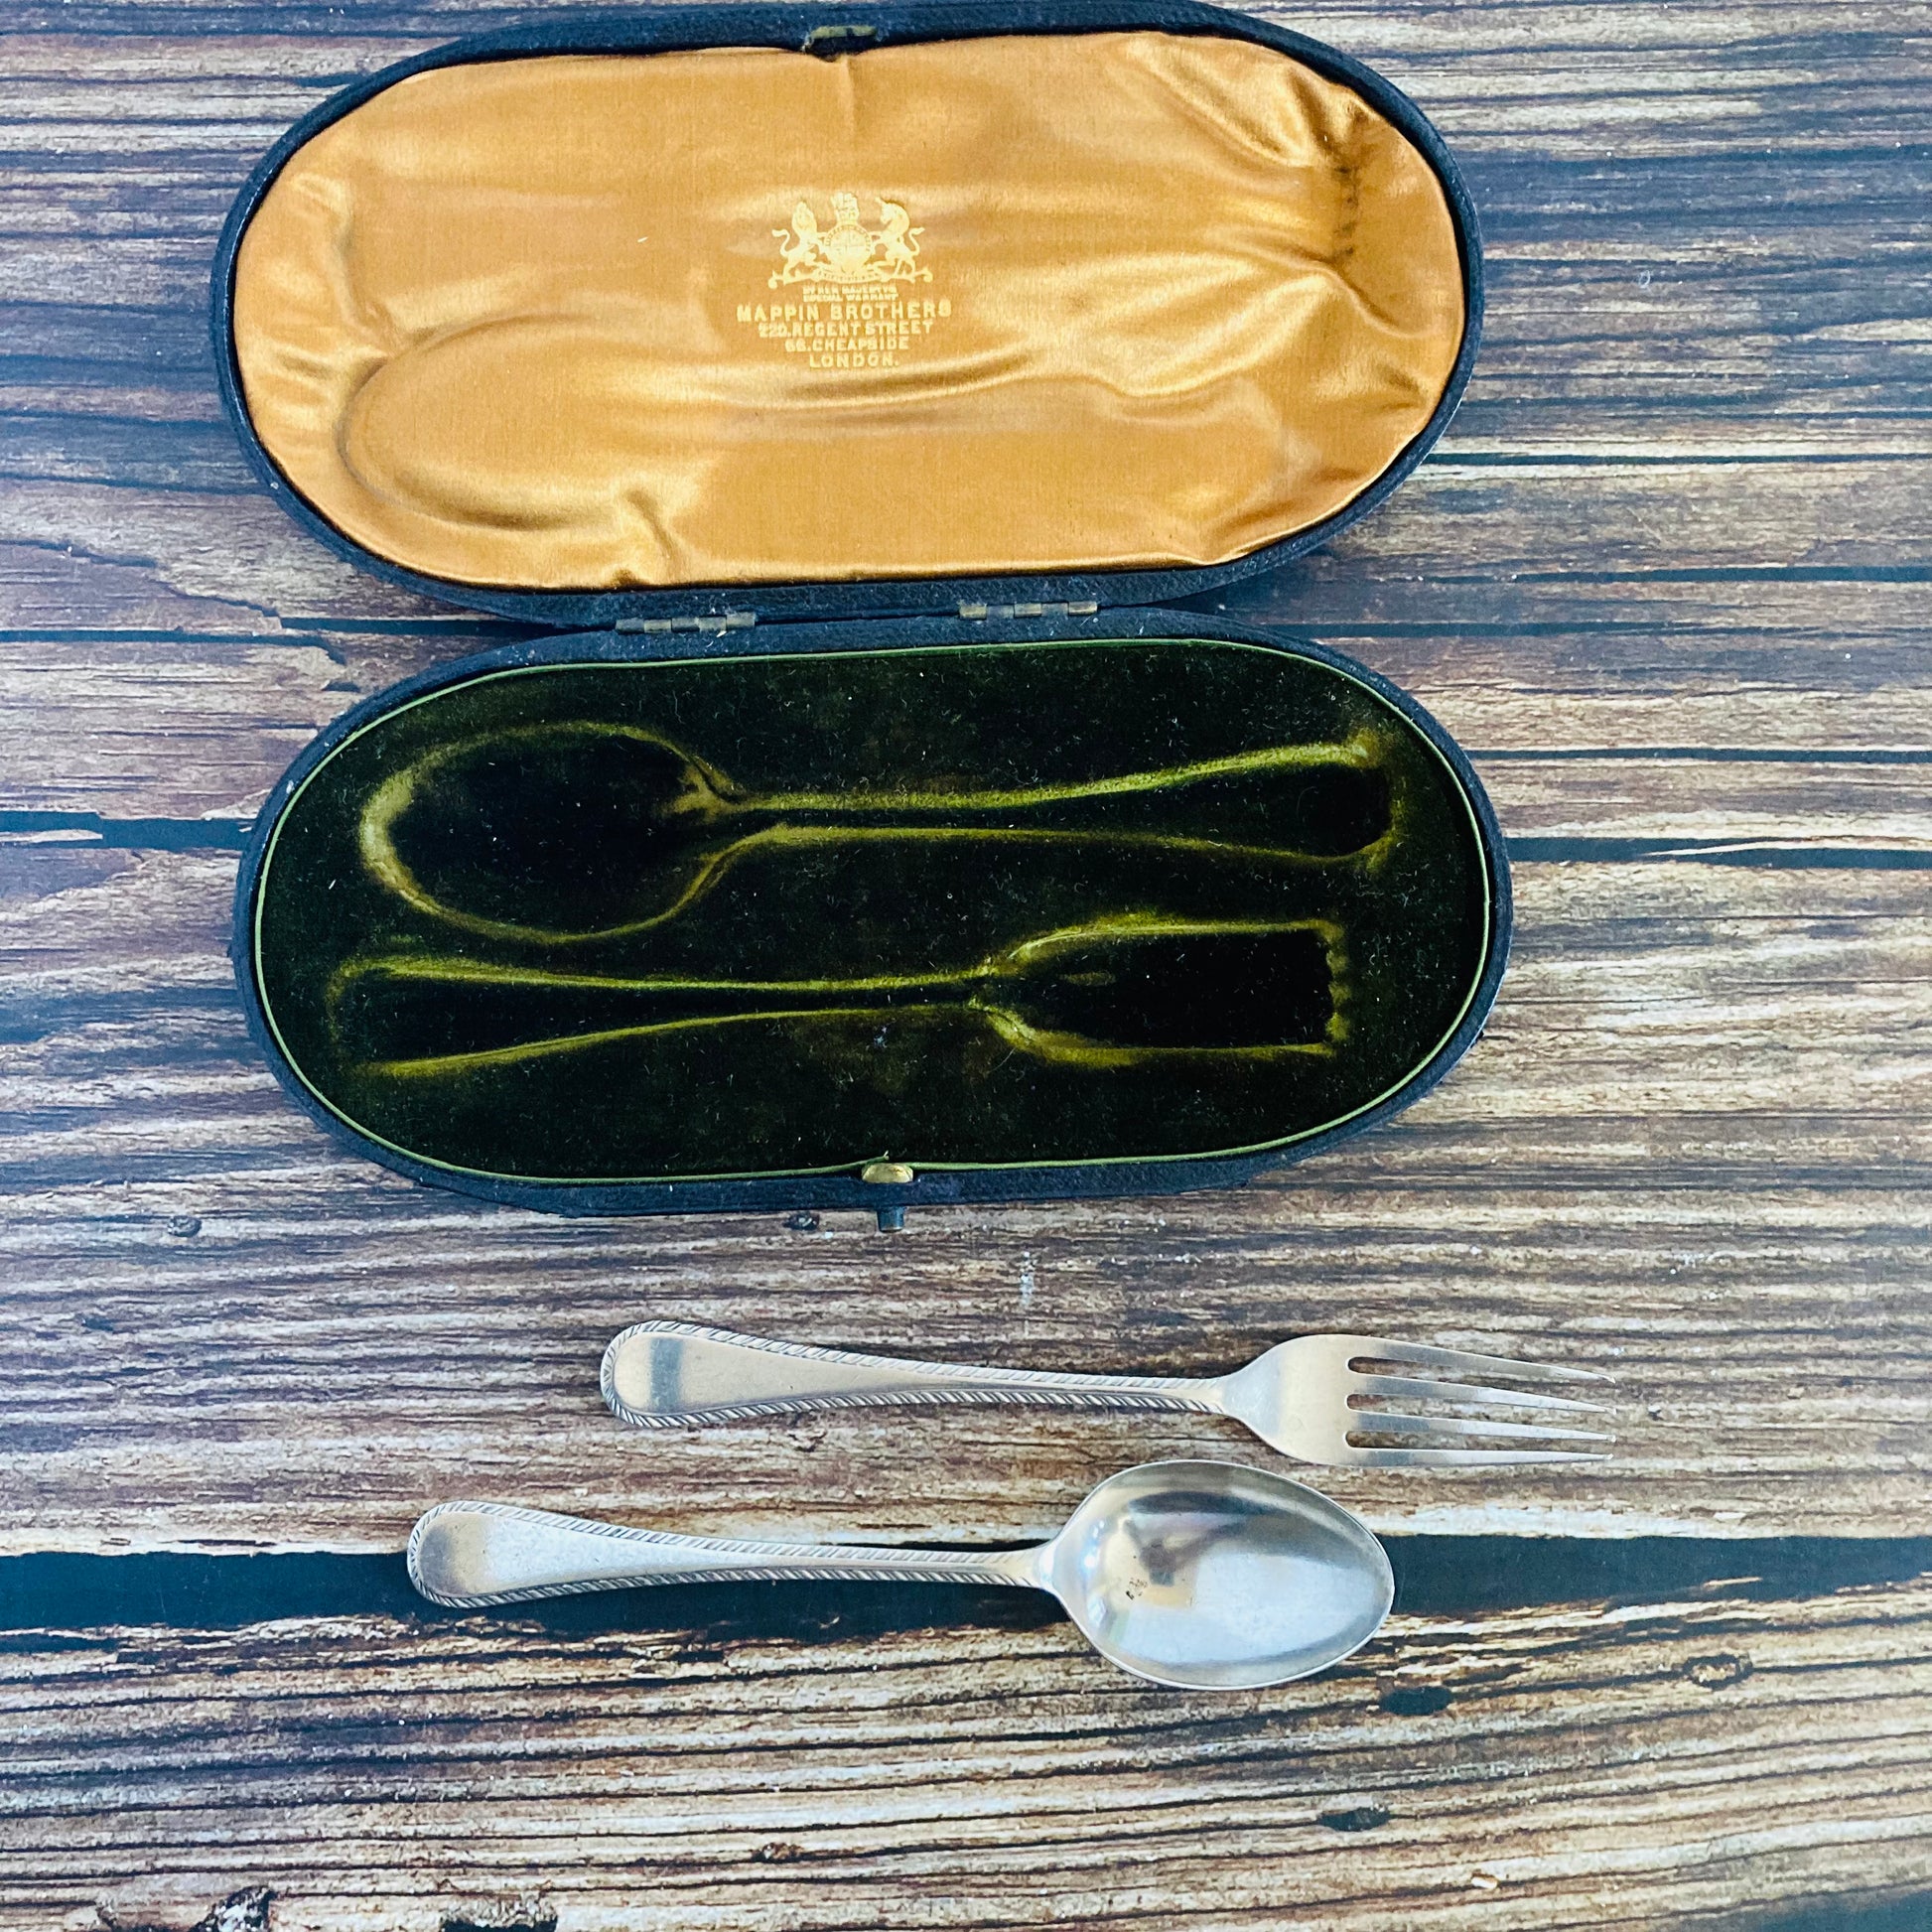 Vintage Silver Infant Spoon and Fork Cutlery Set | Christening Cutlery